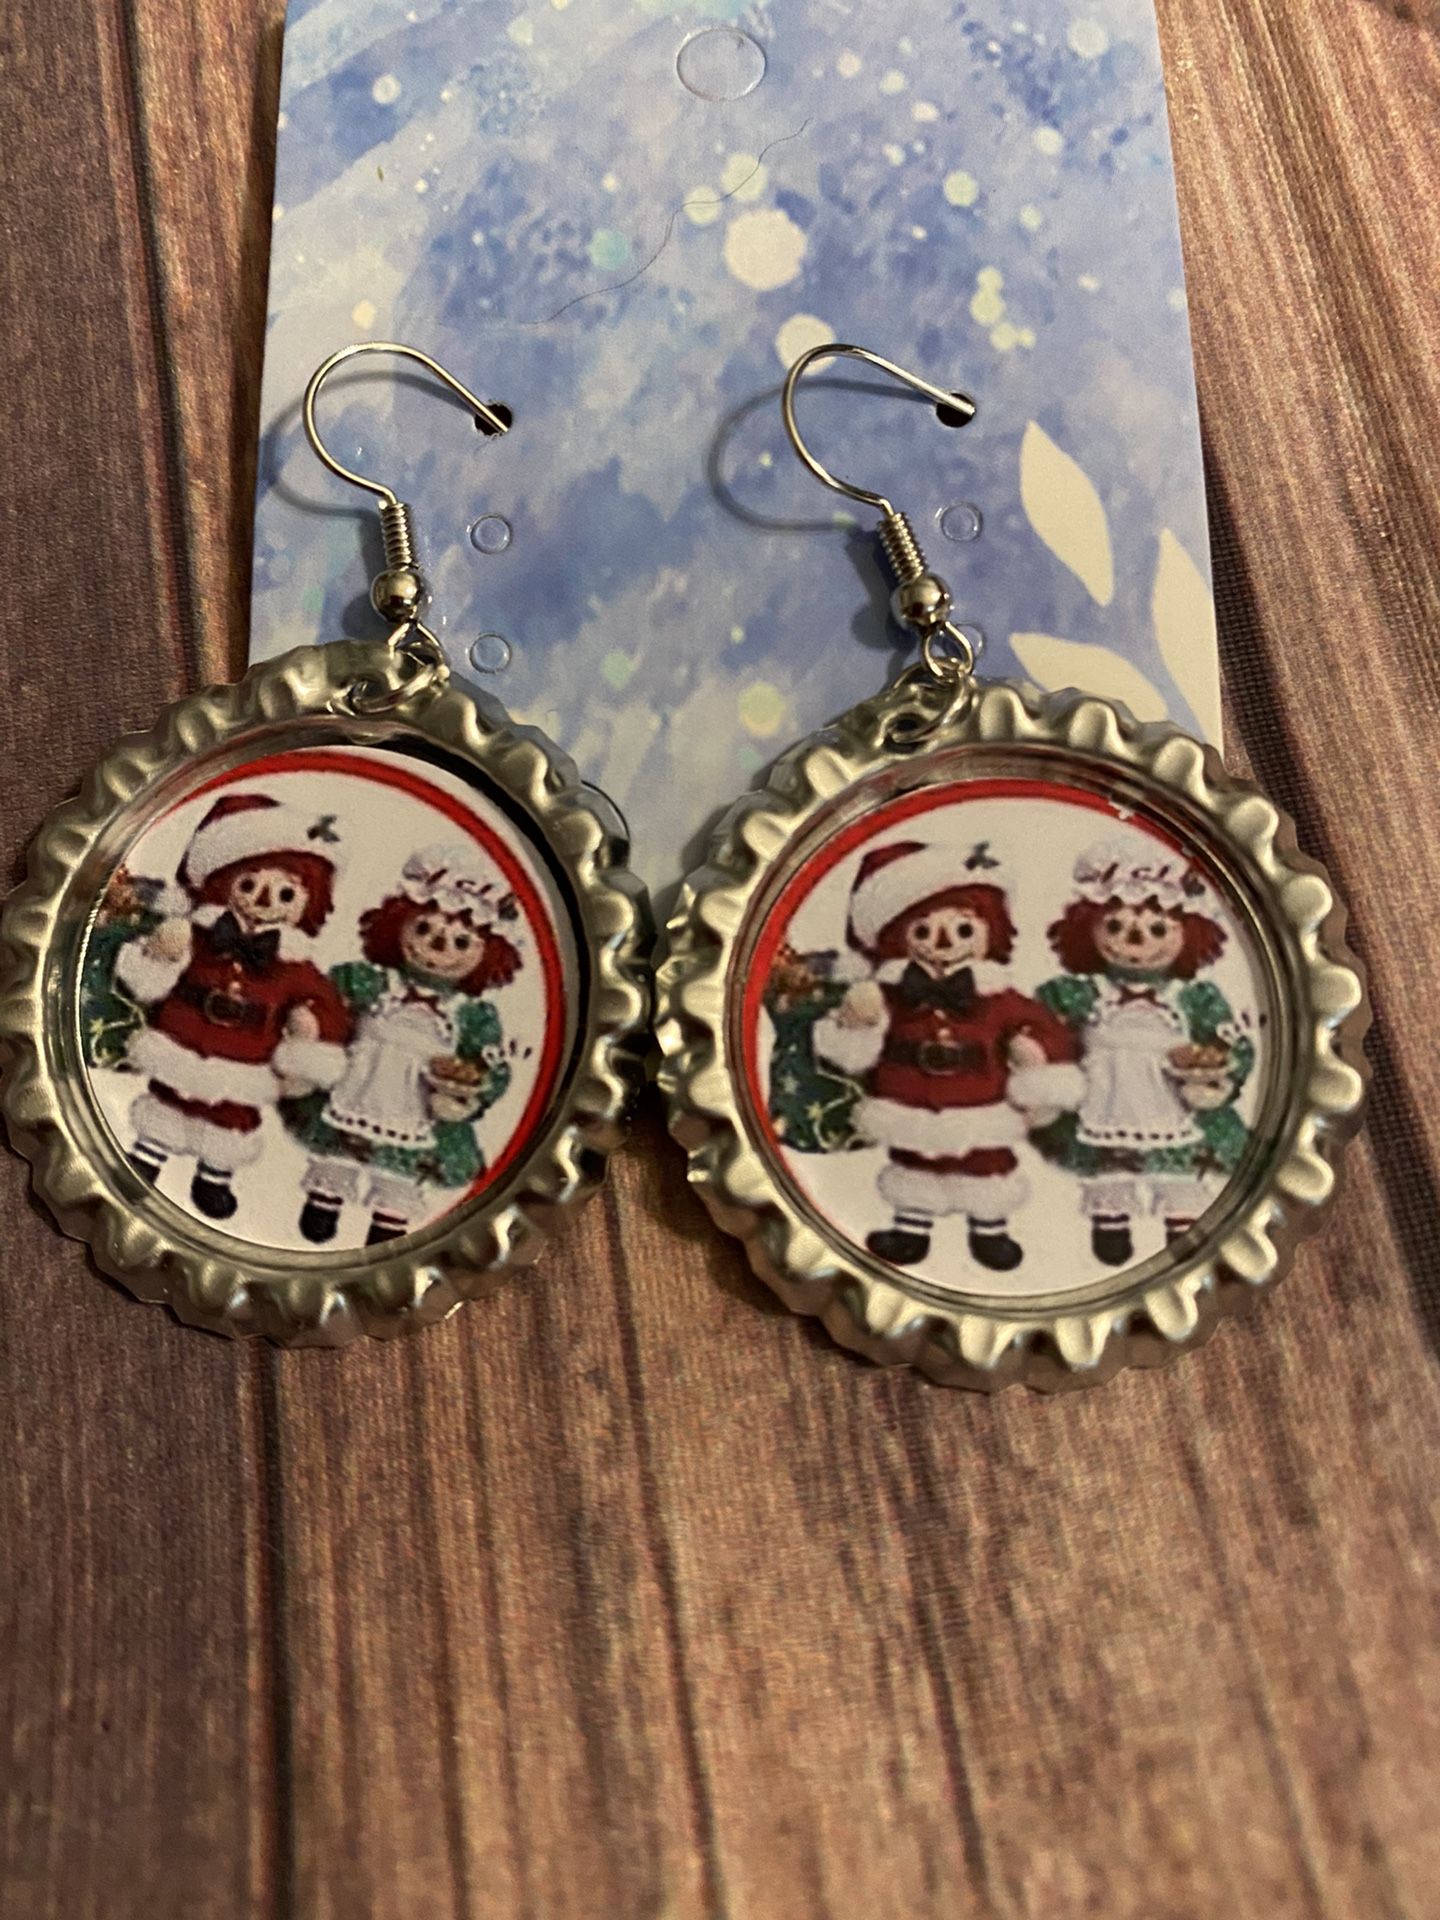 Raggedy Ann and Andy earrings